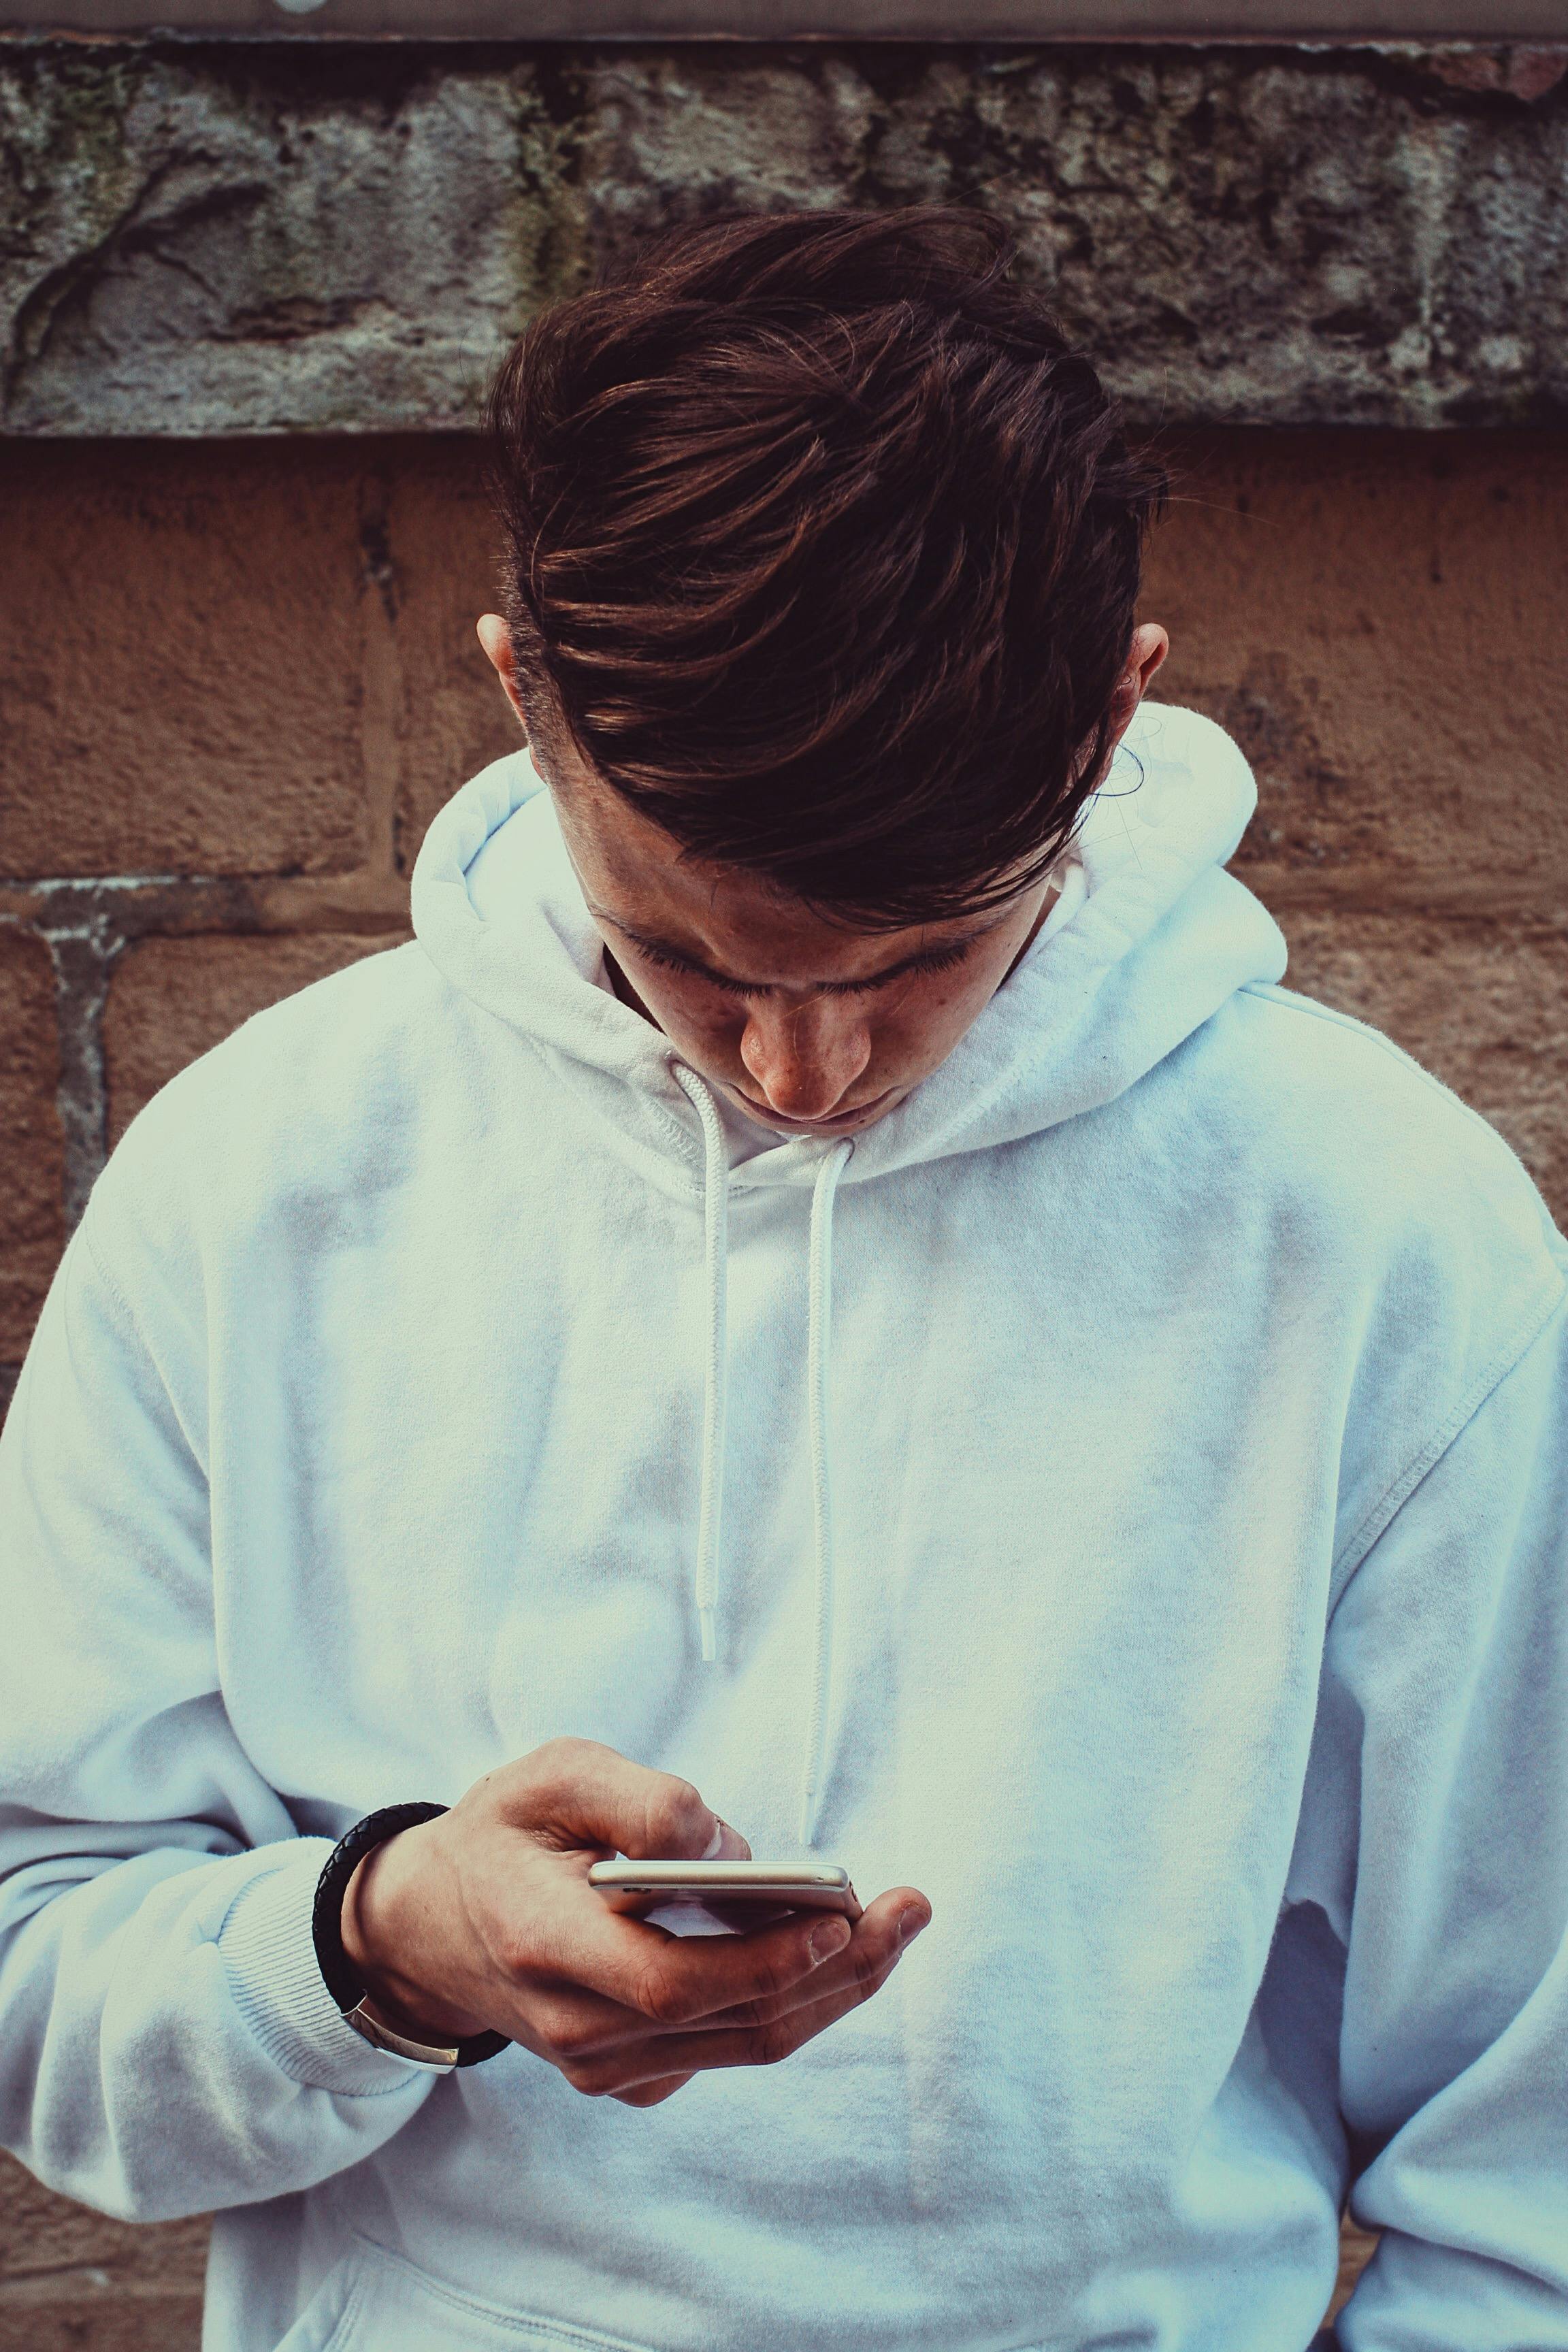 A serious-looking man texting | Source: Pexels